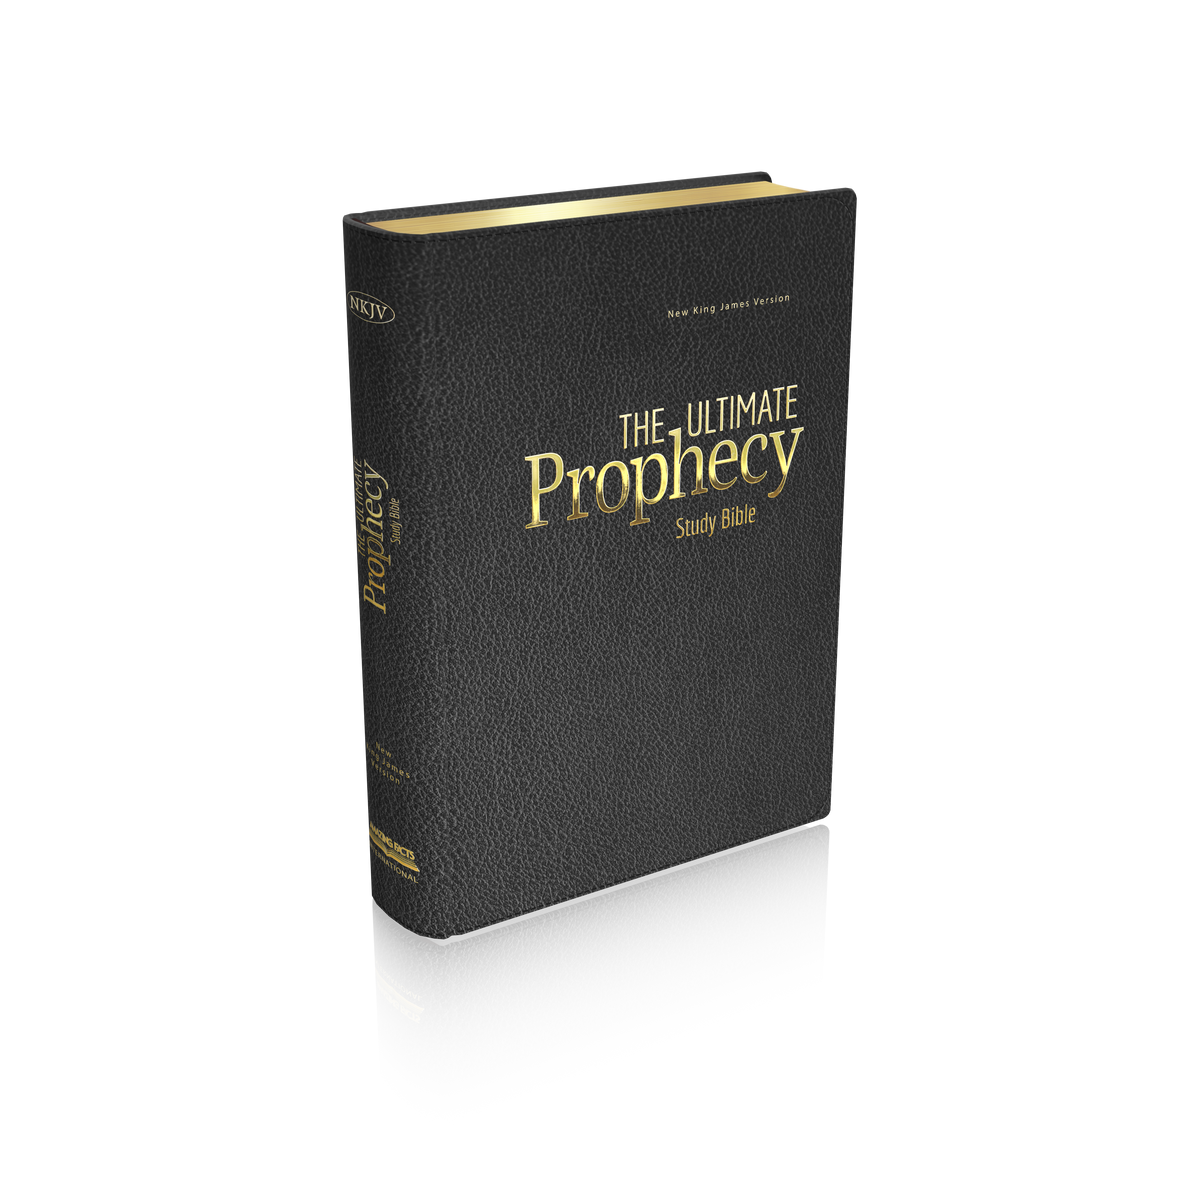 Pre-Order Now! The Ultimate Prophecy Study Bible - Black Leather by Amazing Facts